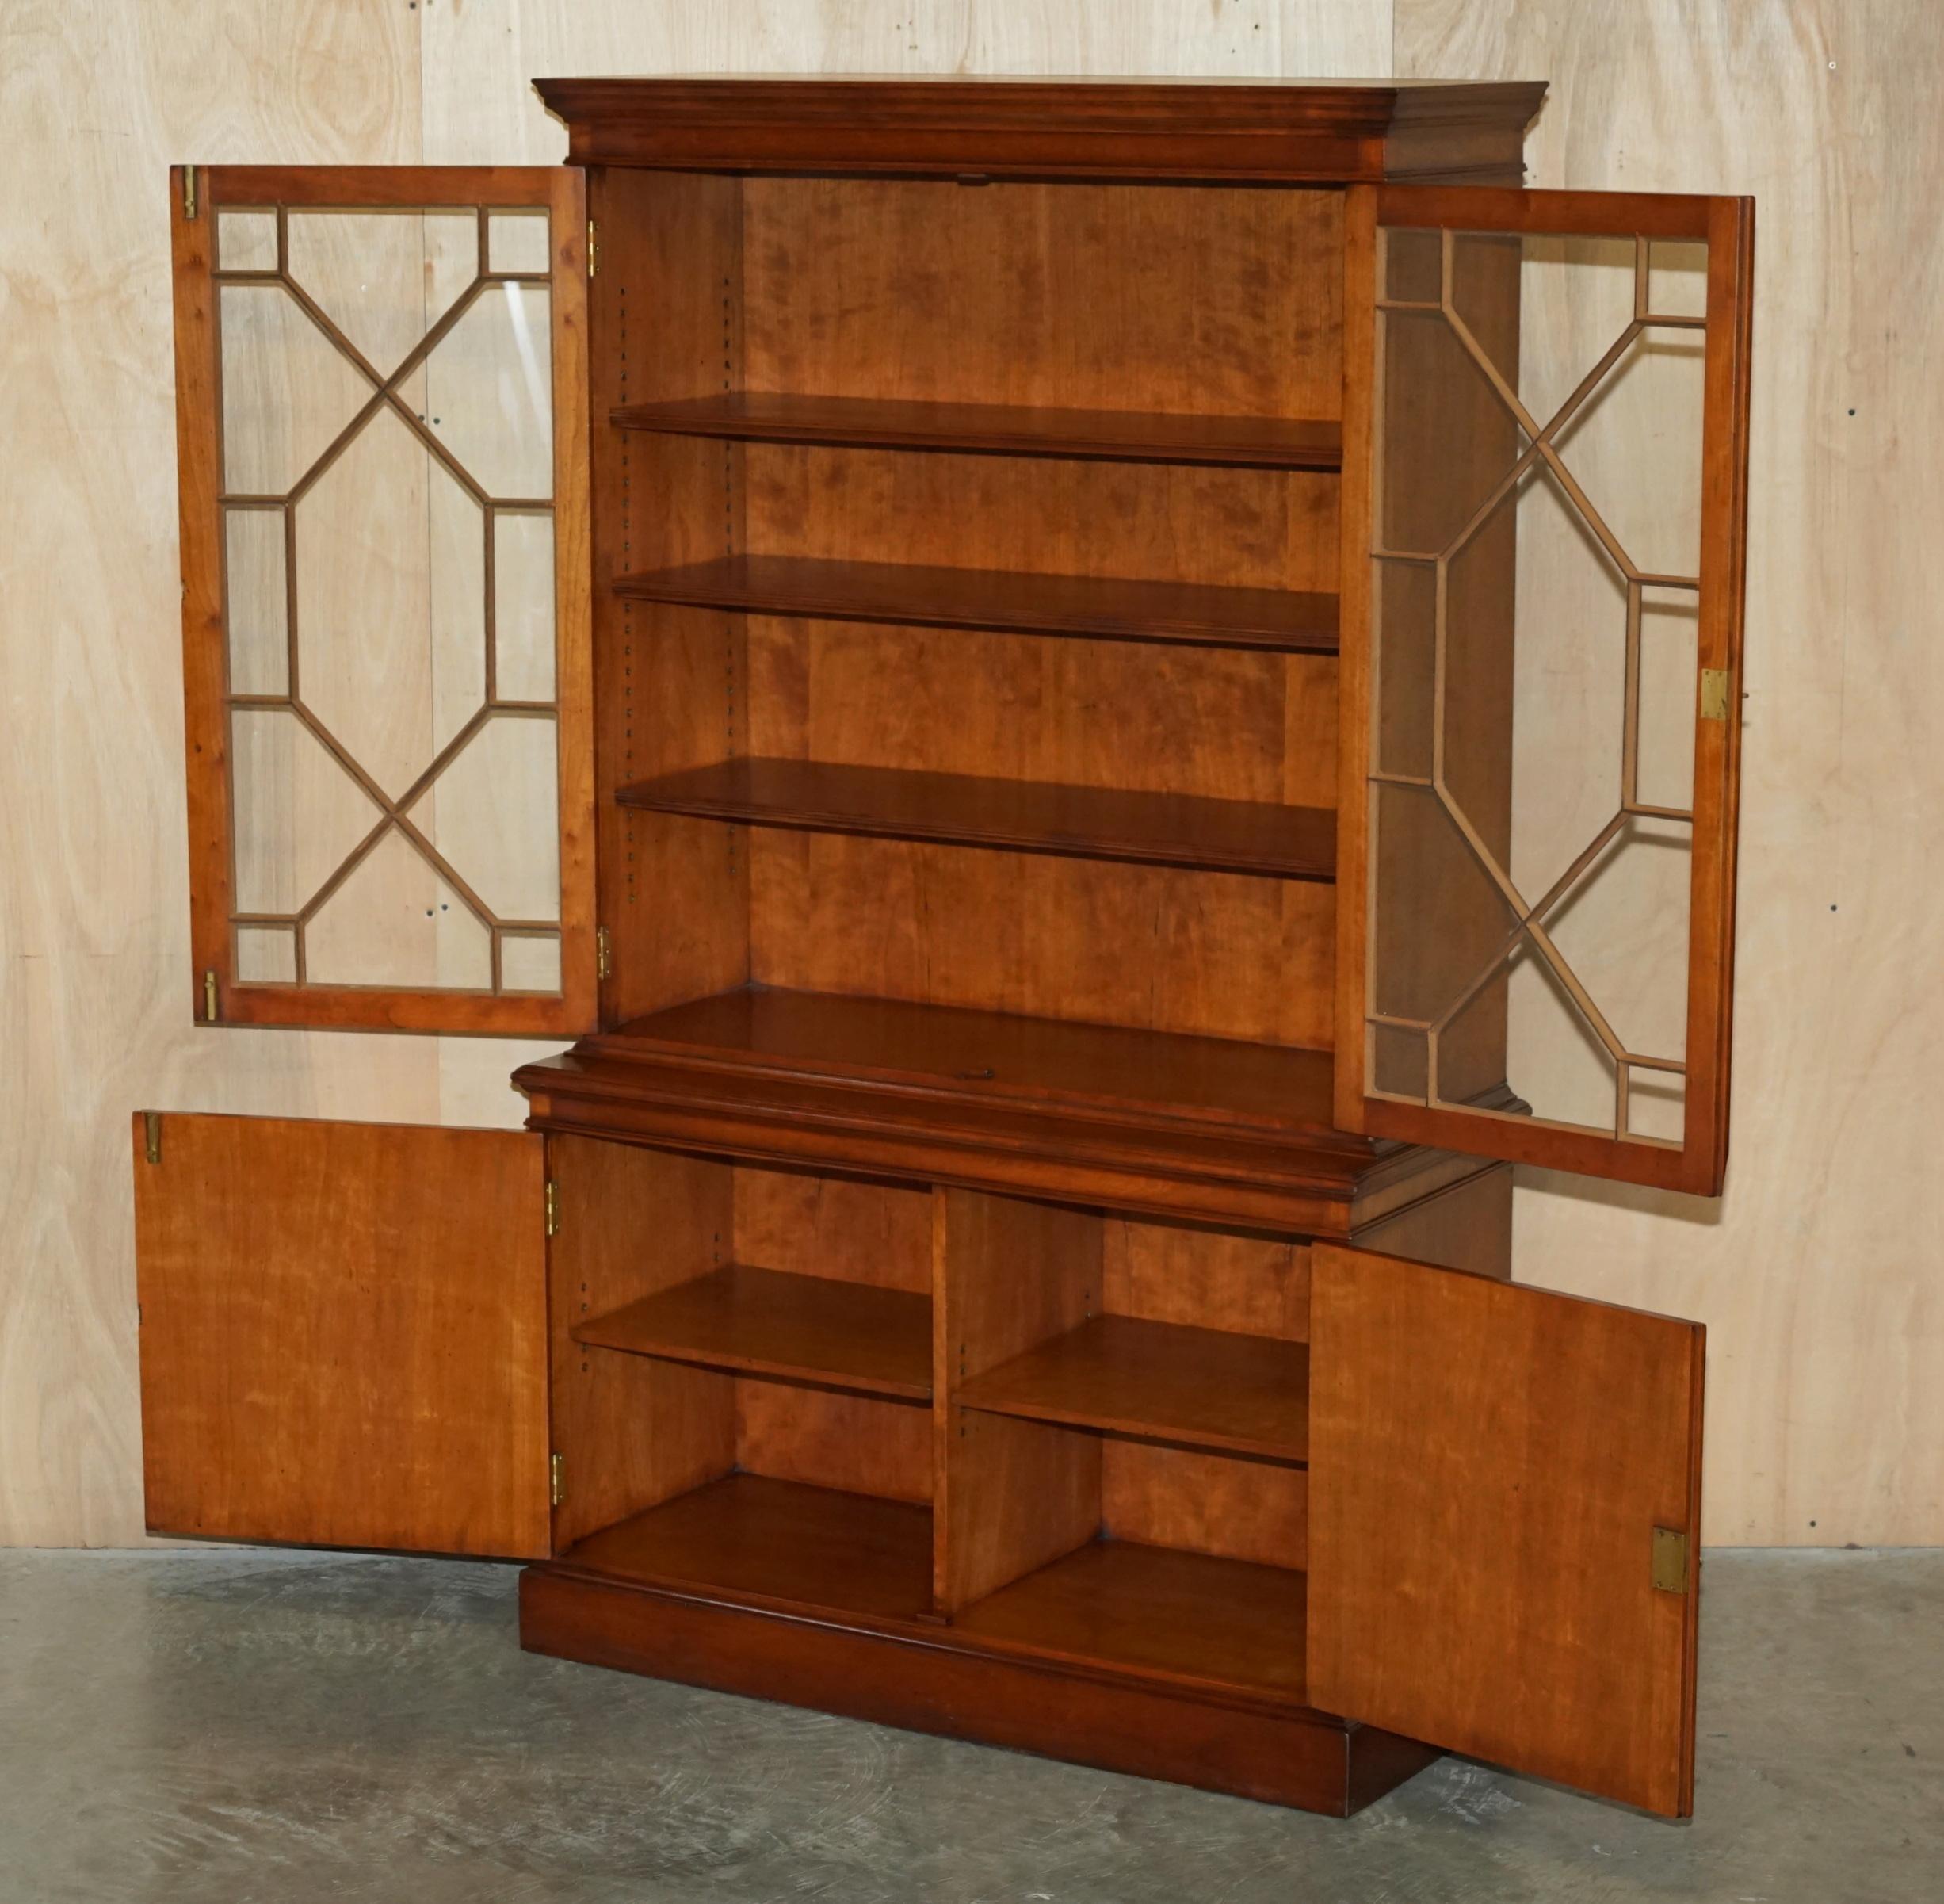 HARRODS LONDON REH KENNEDY ASTRAL GLAZED LiBRARY BOOKCASE CUPBOARD STORAGE UNIT For Sale 8